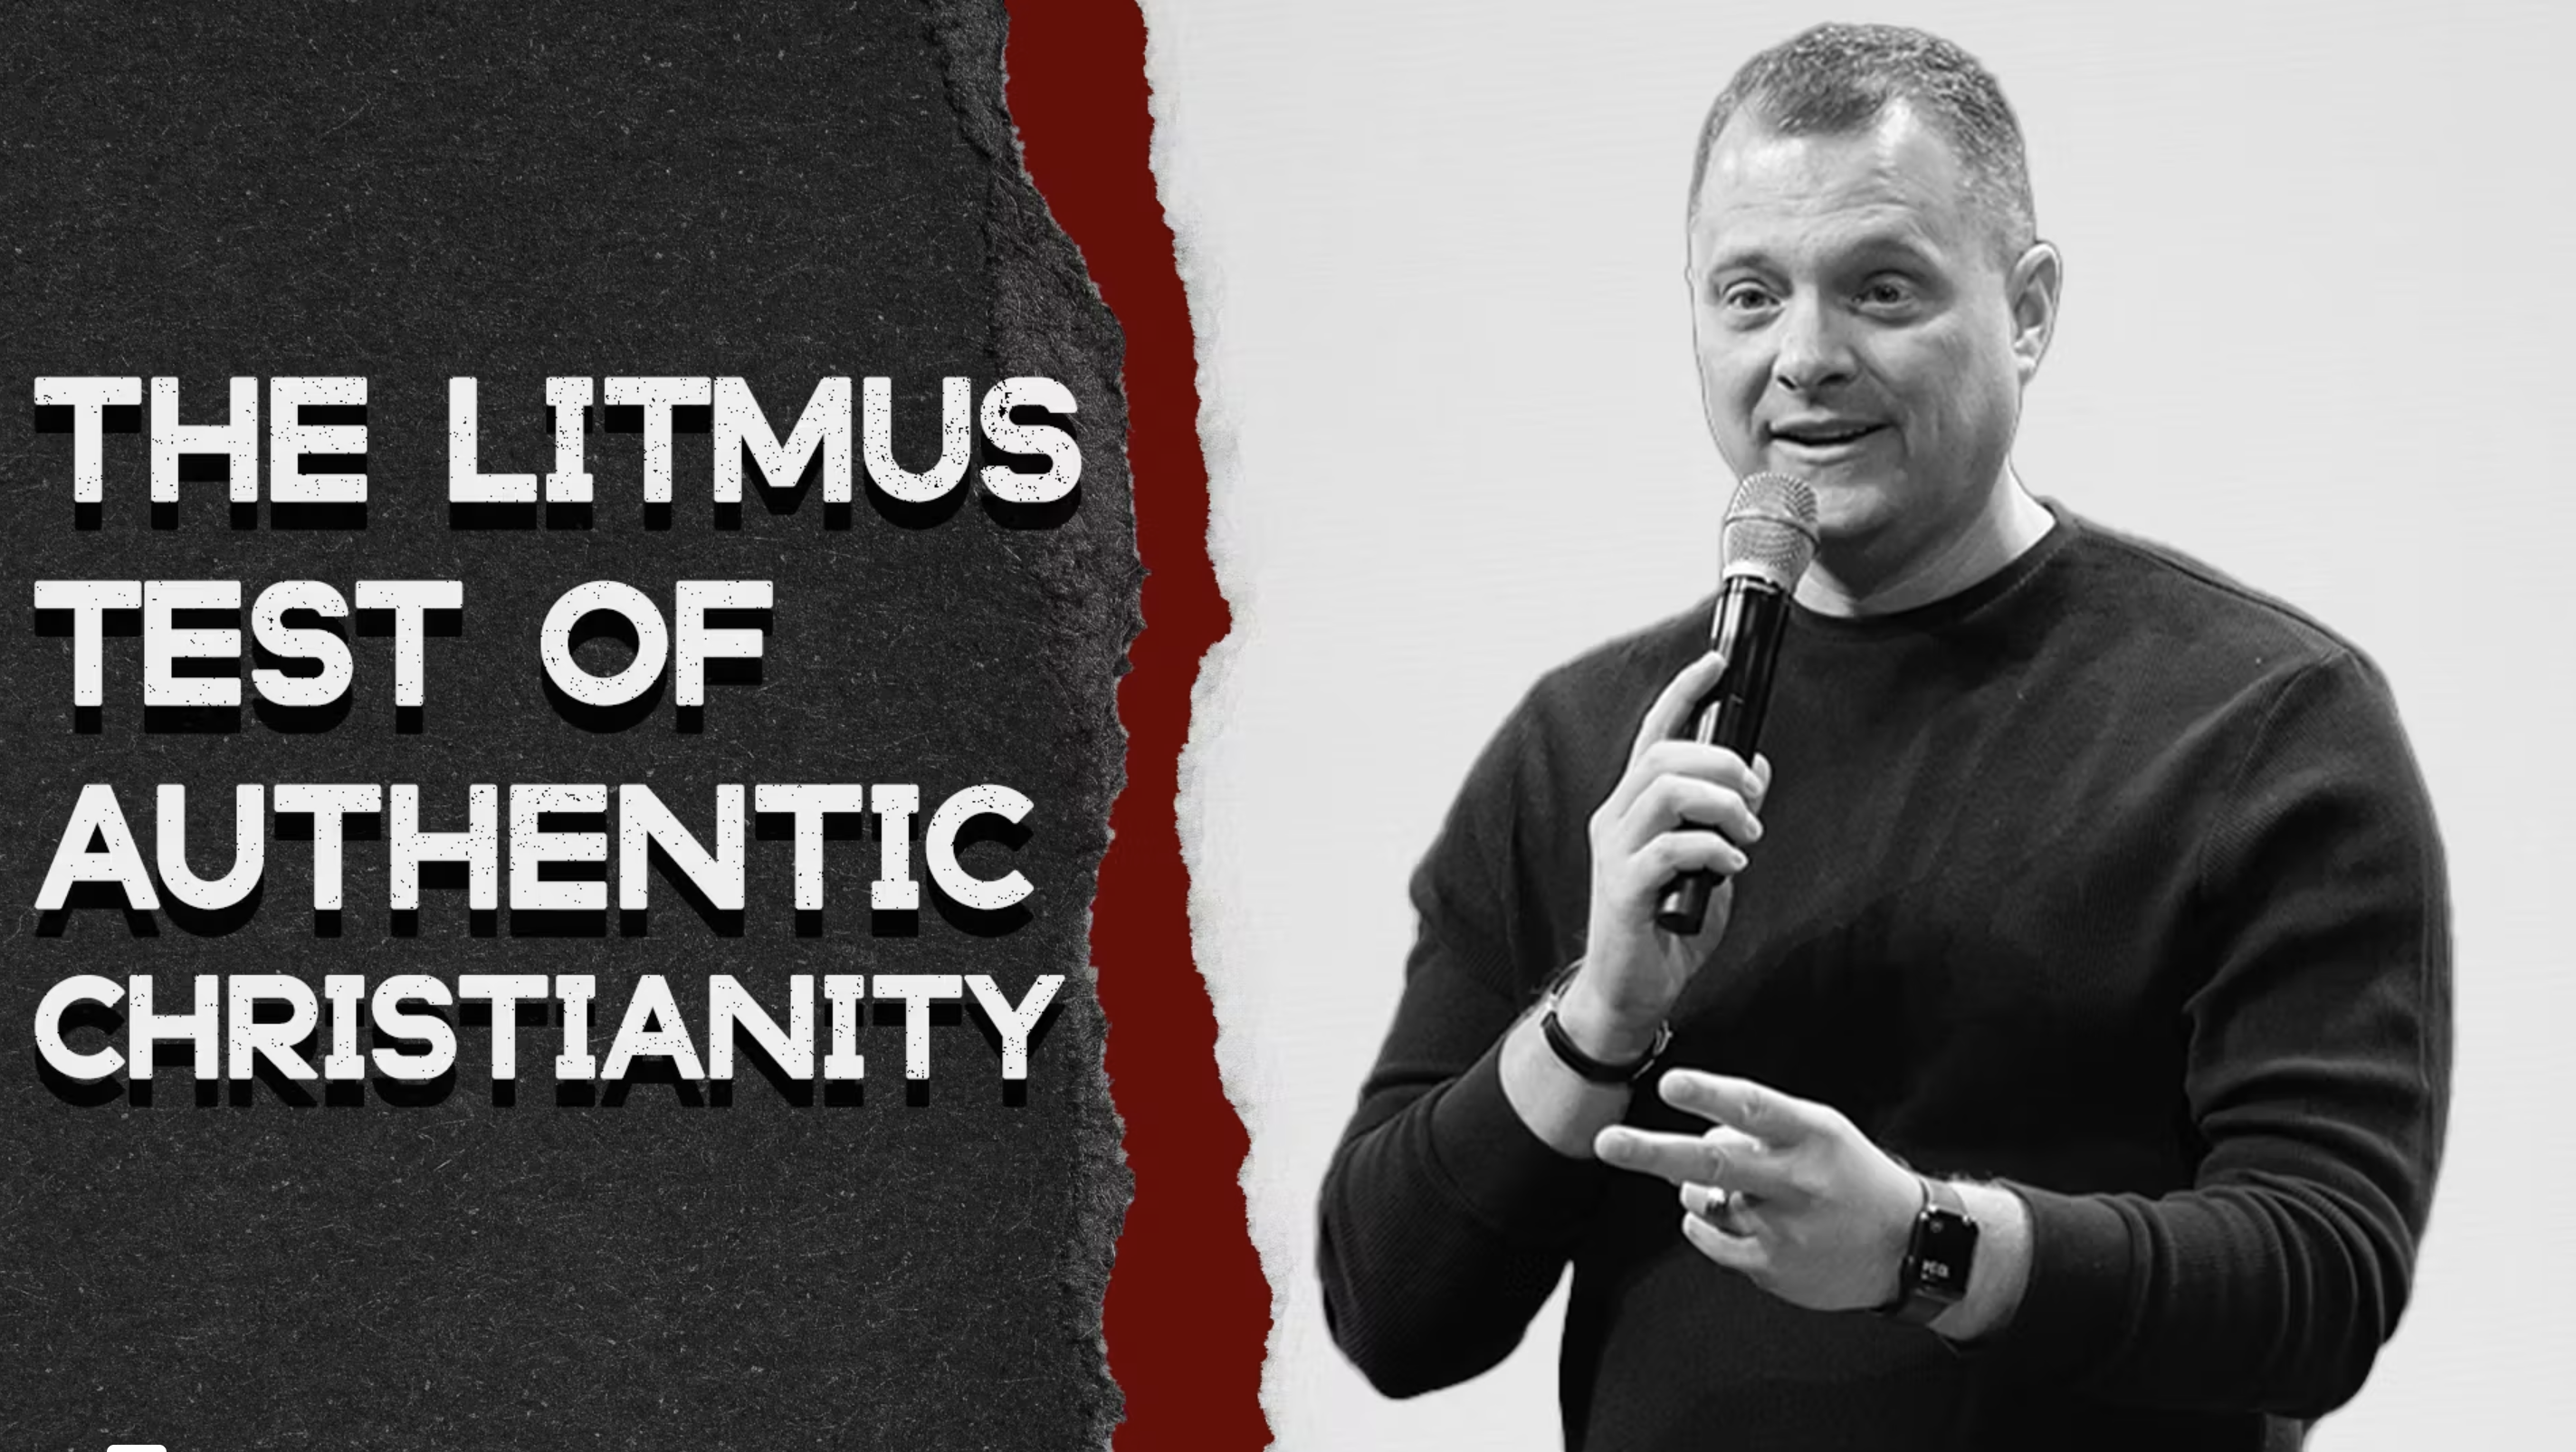 The Litmus Test of Authentic Christianity Image